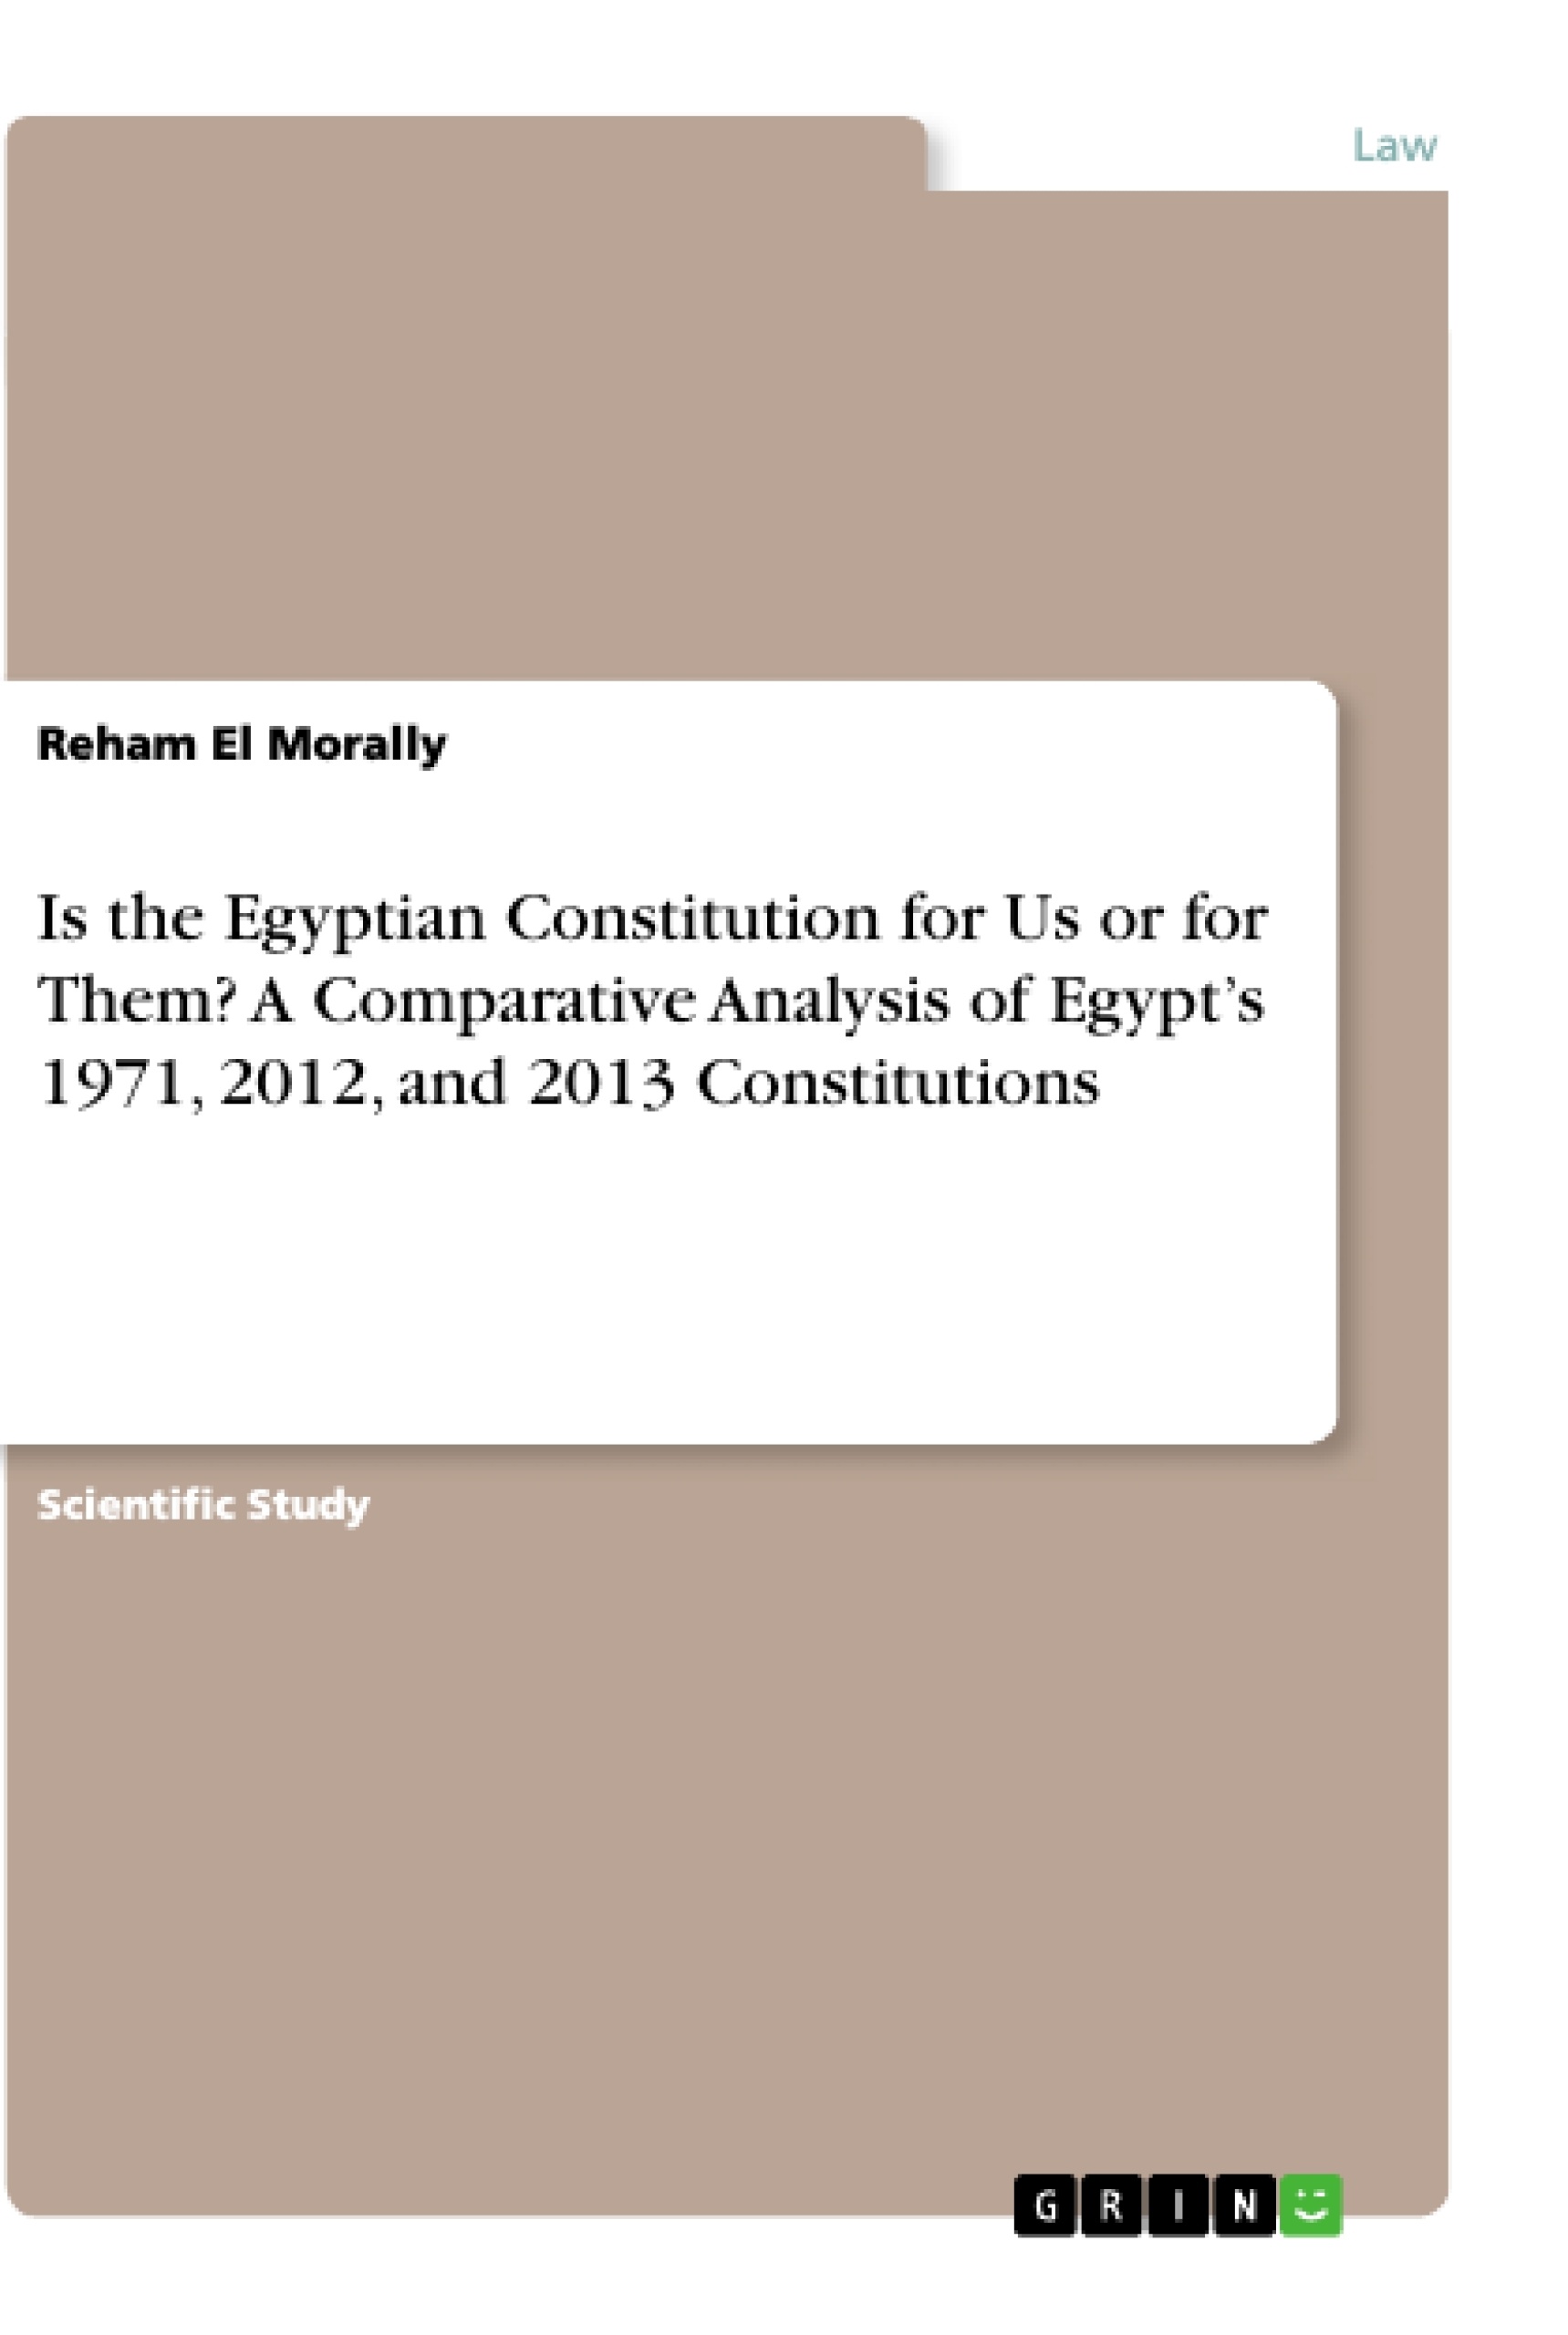 Titel: Is the Egyptian Constitution for Us or for Them? A Comparative Analysis of Egypt’s 1971, 2012, and 2013 Constitutions